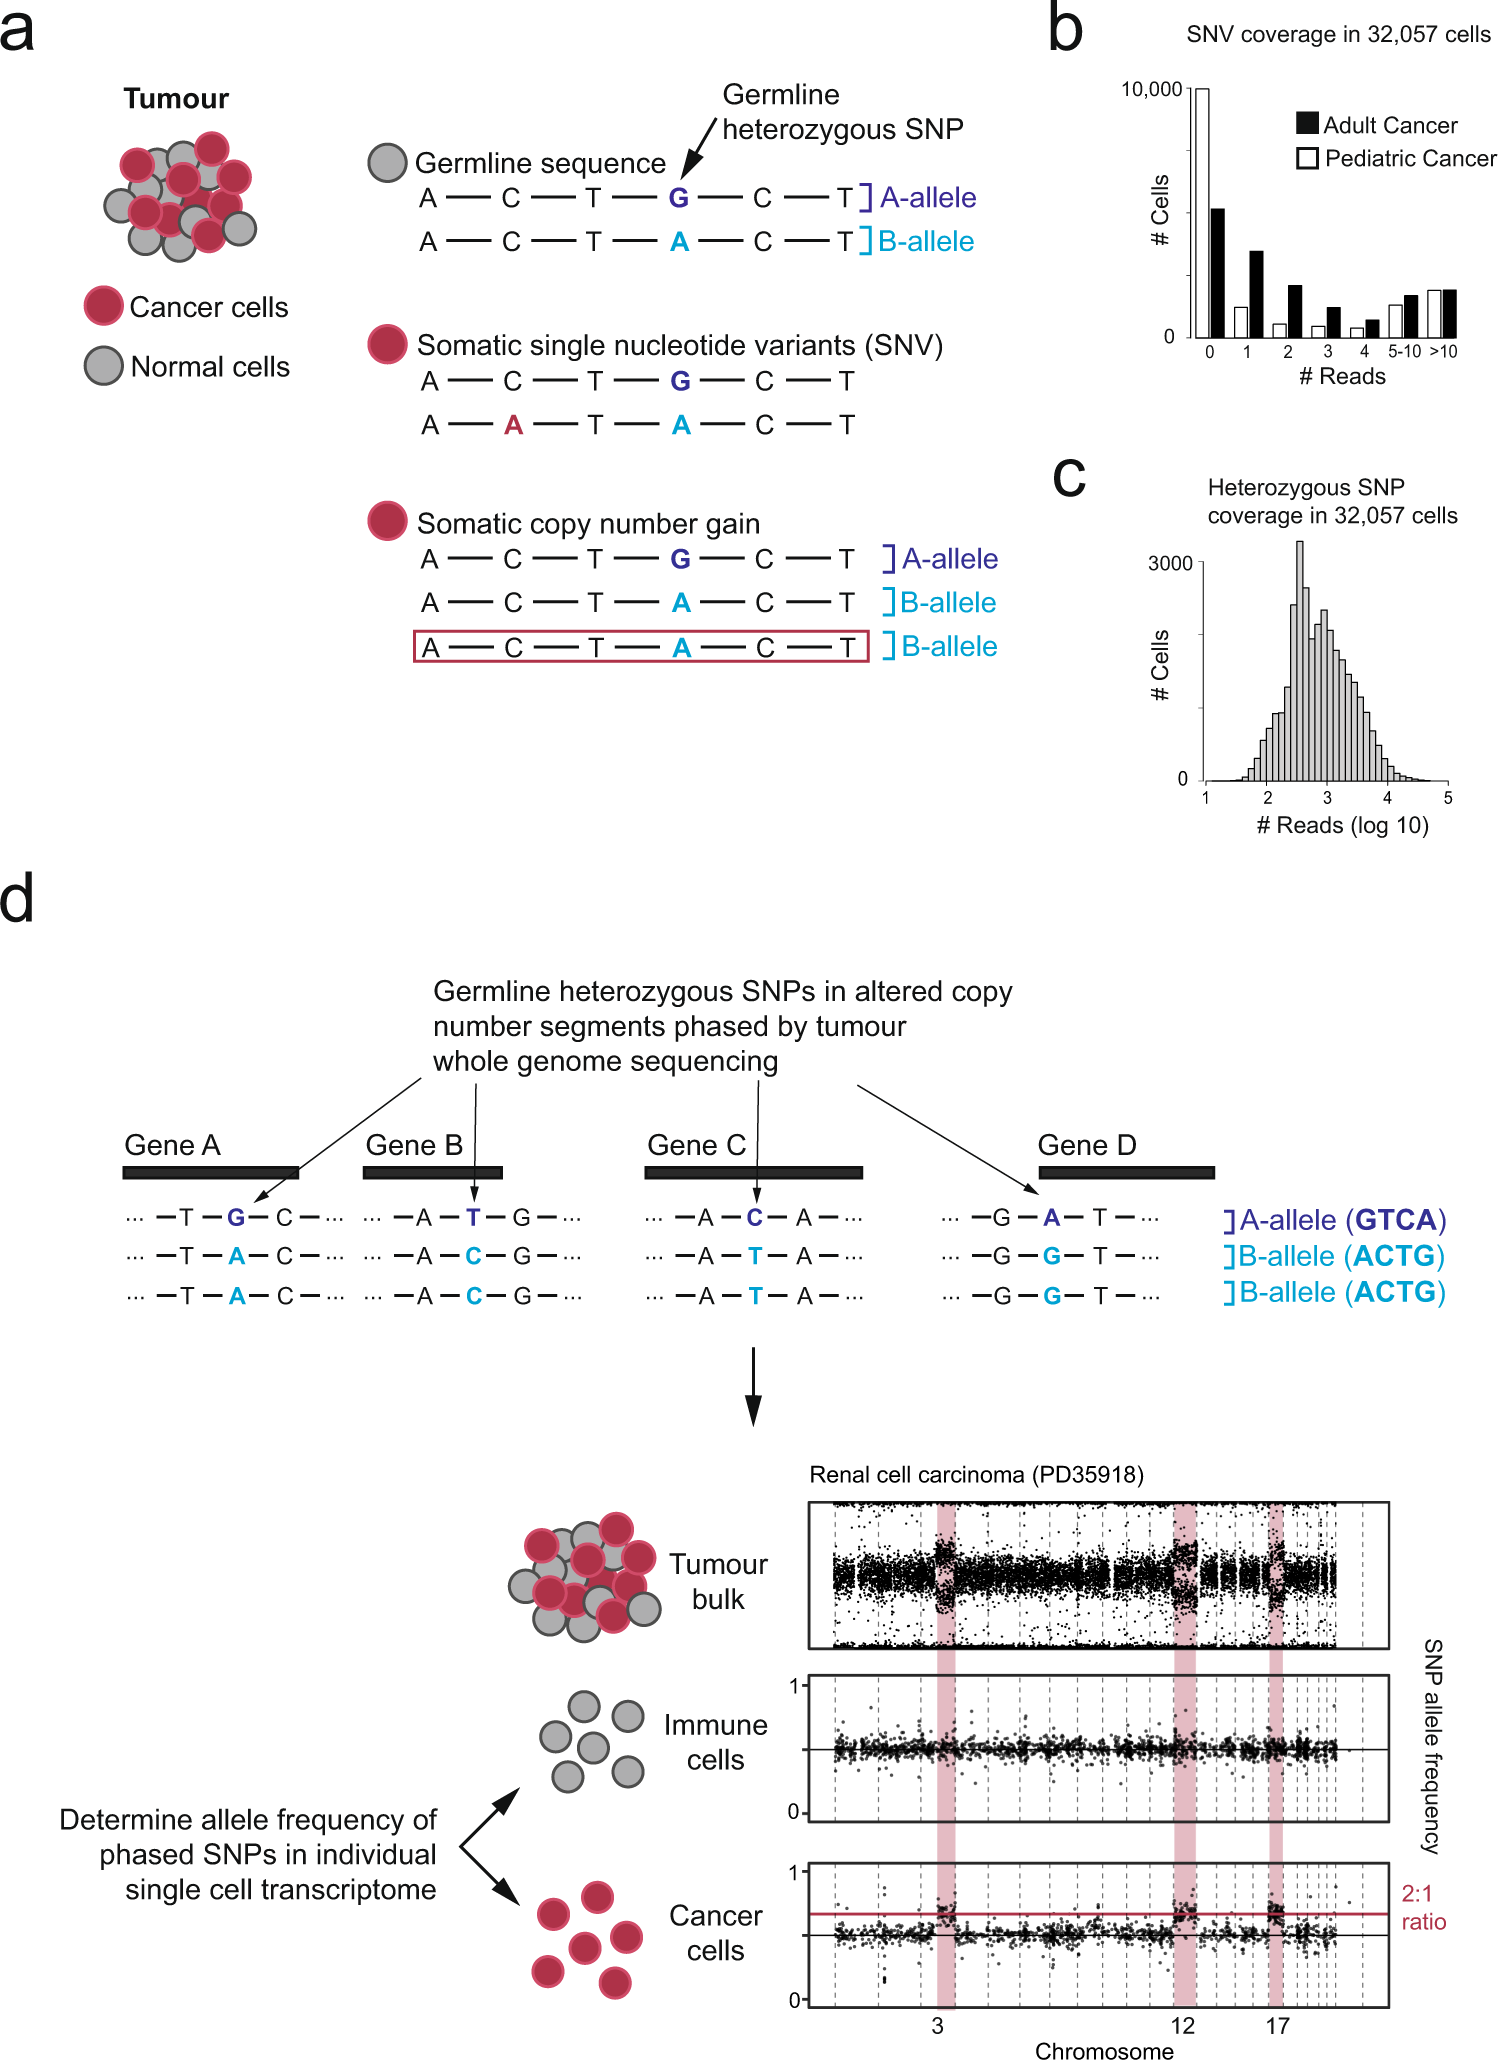 Precise identification of cancer cells from allelic imbalances in single  cell transcriptomes | Communications Biology